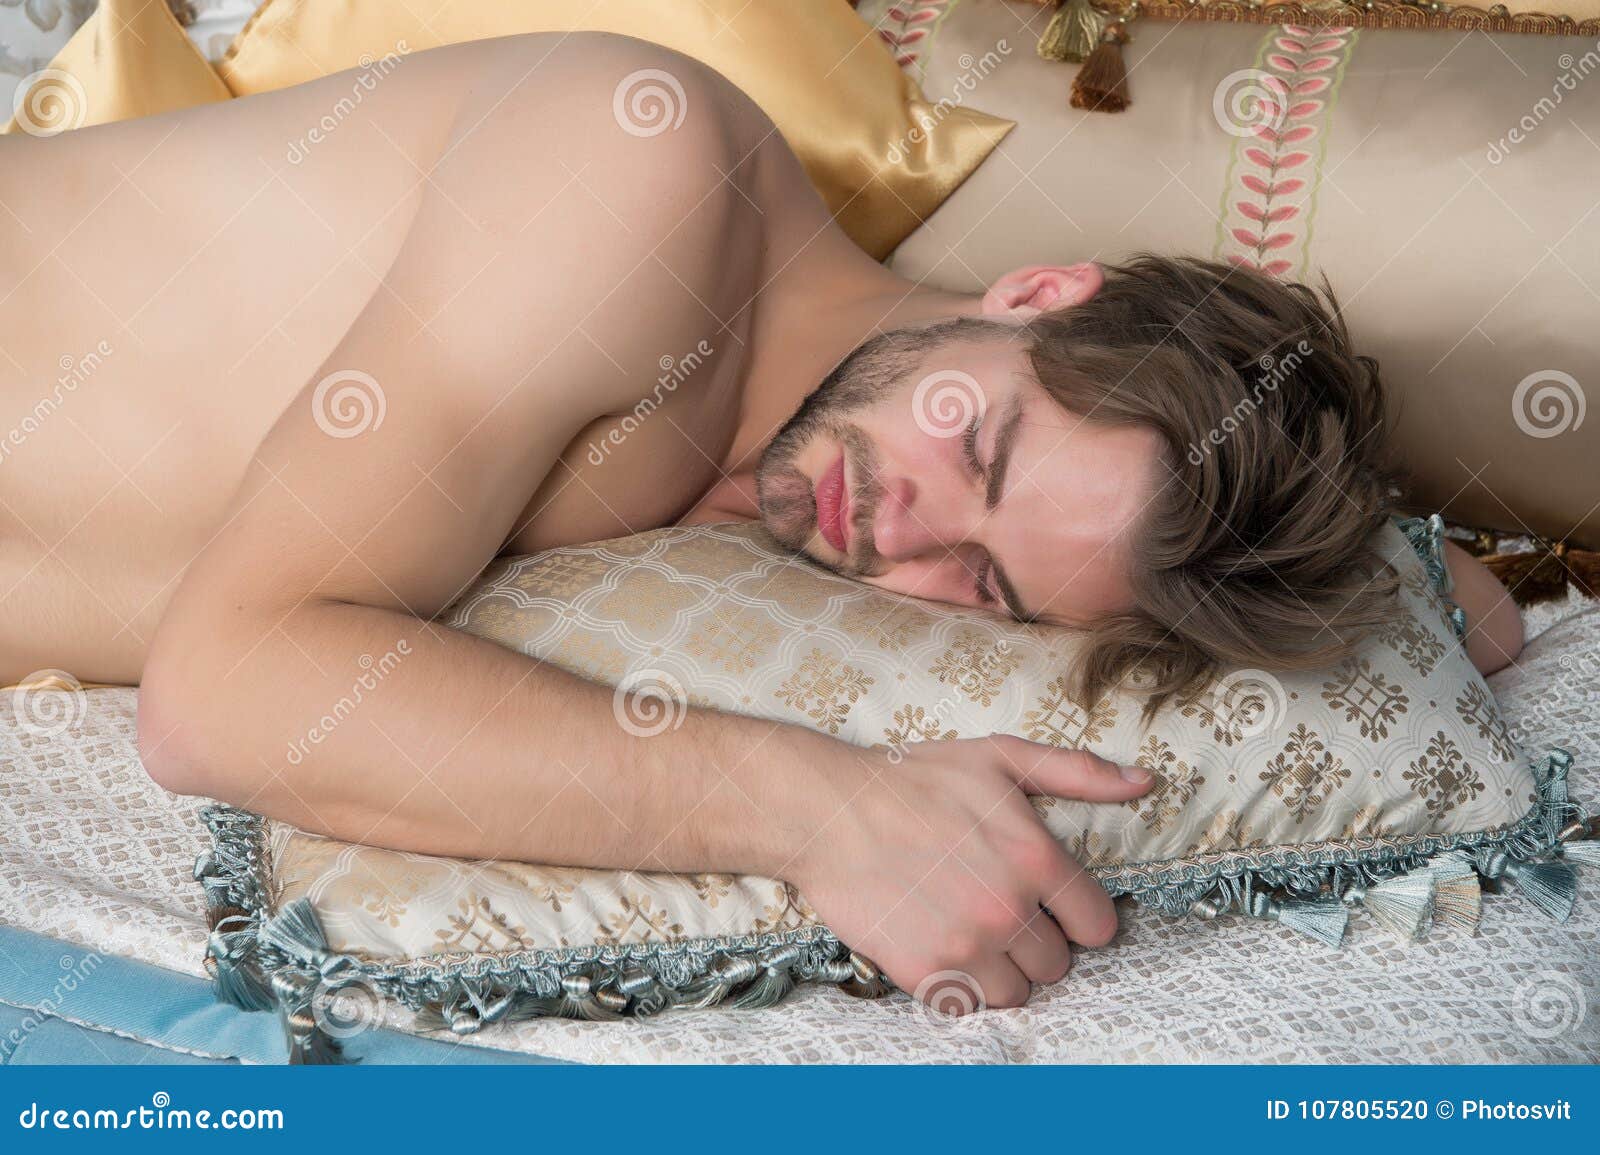 Macho Guy Torso Relaxing Lay Bedroom Morning Wood Formally Known Nocturnal Penile Tumescence